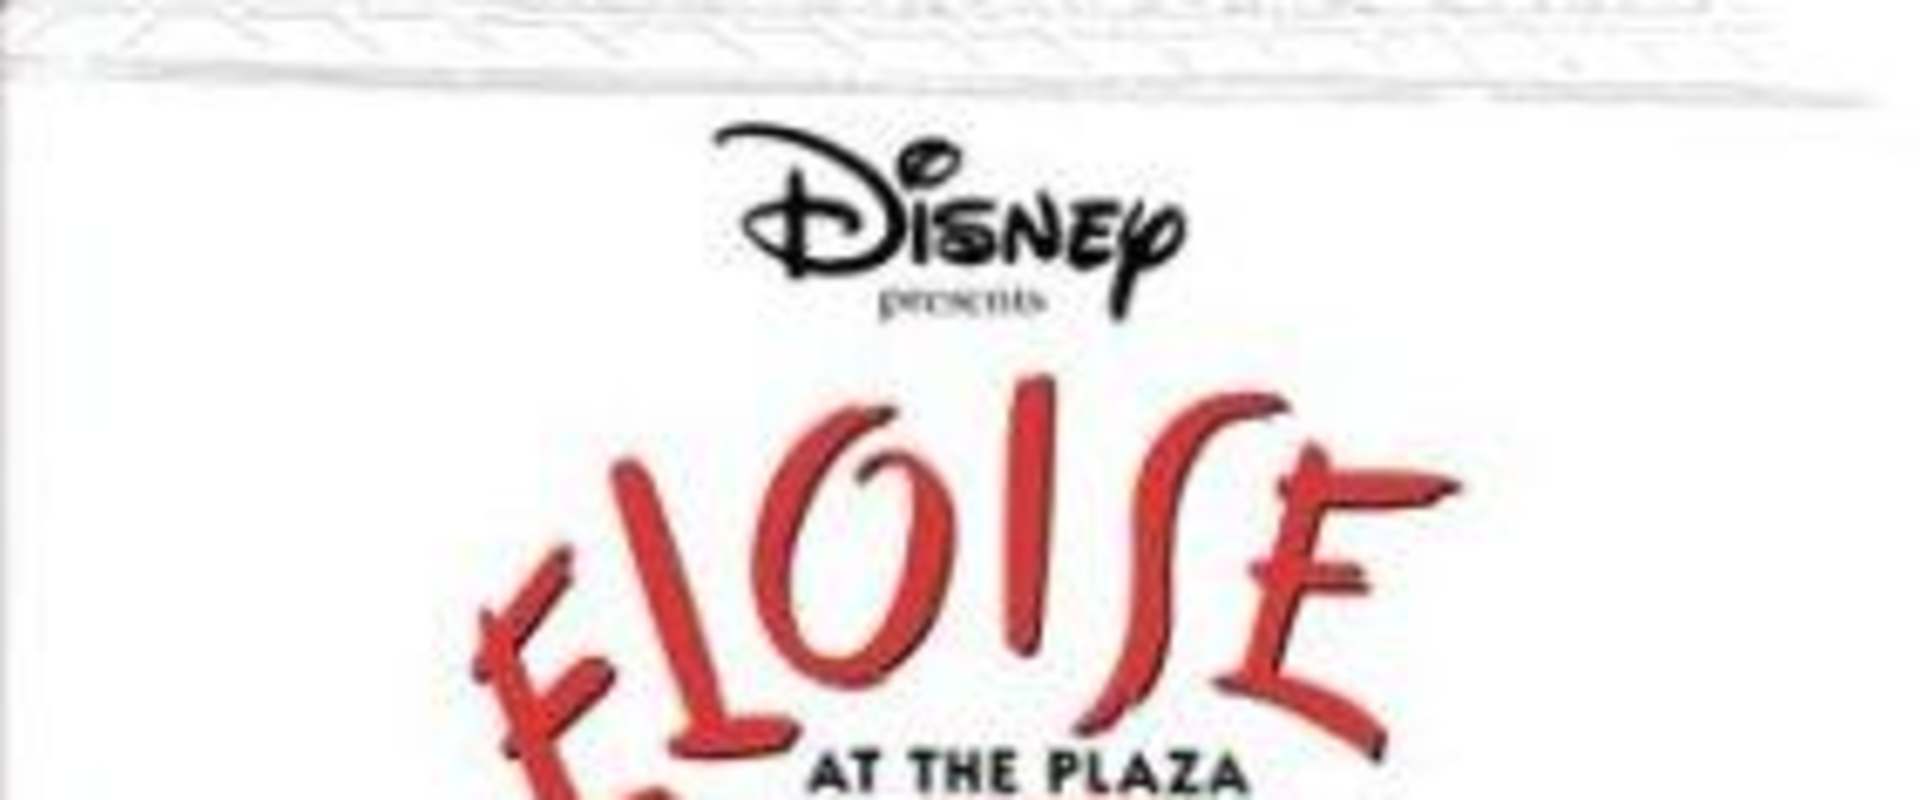 Eloise at the Plaza background 1